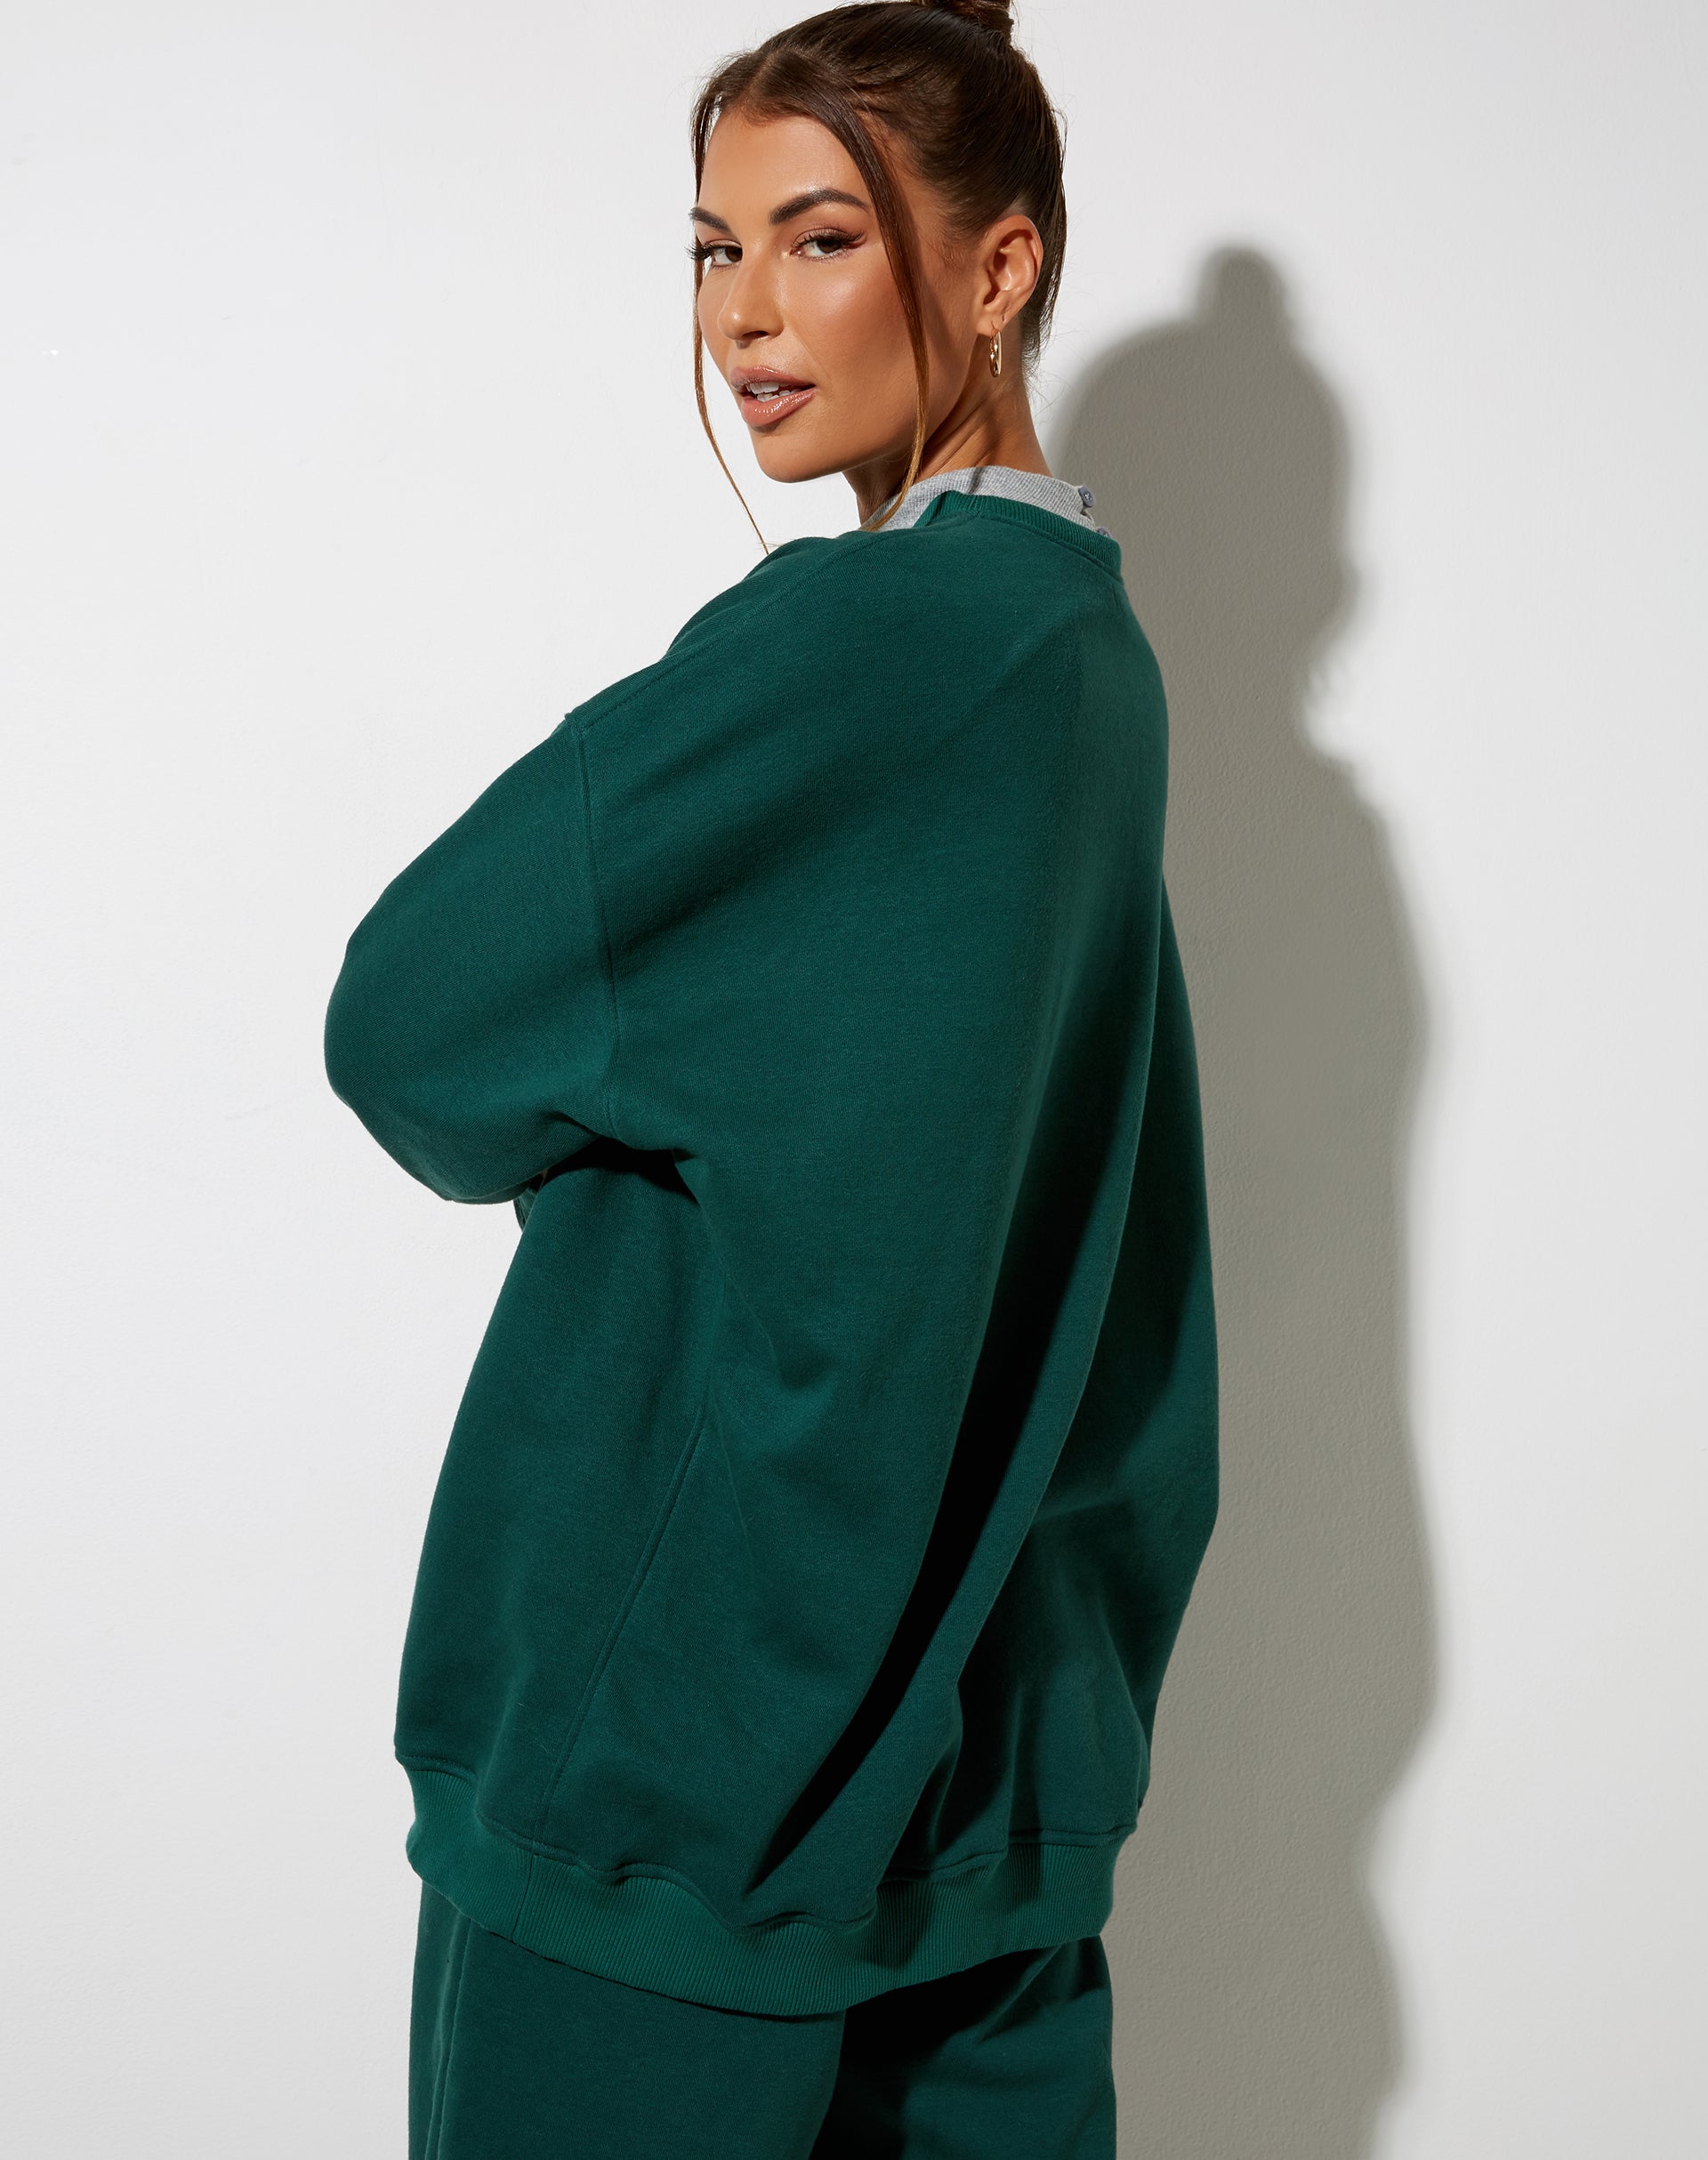 Image of Glo Sweatshirt in Bottle Green with Angel Embro in White